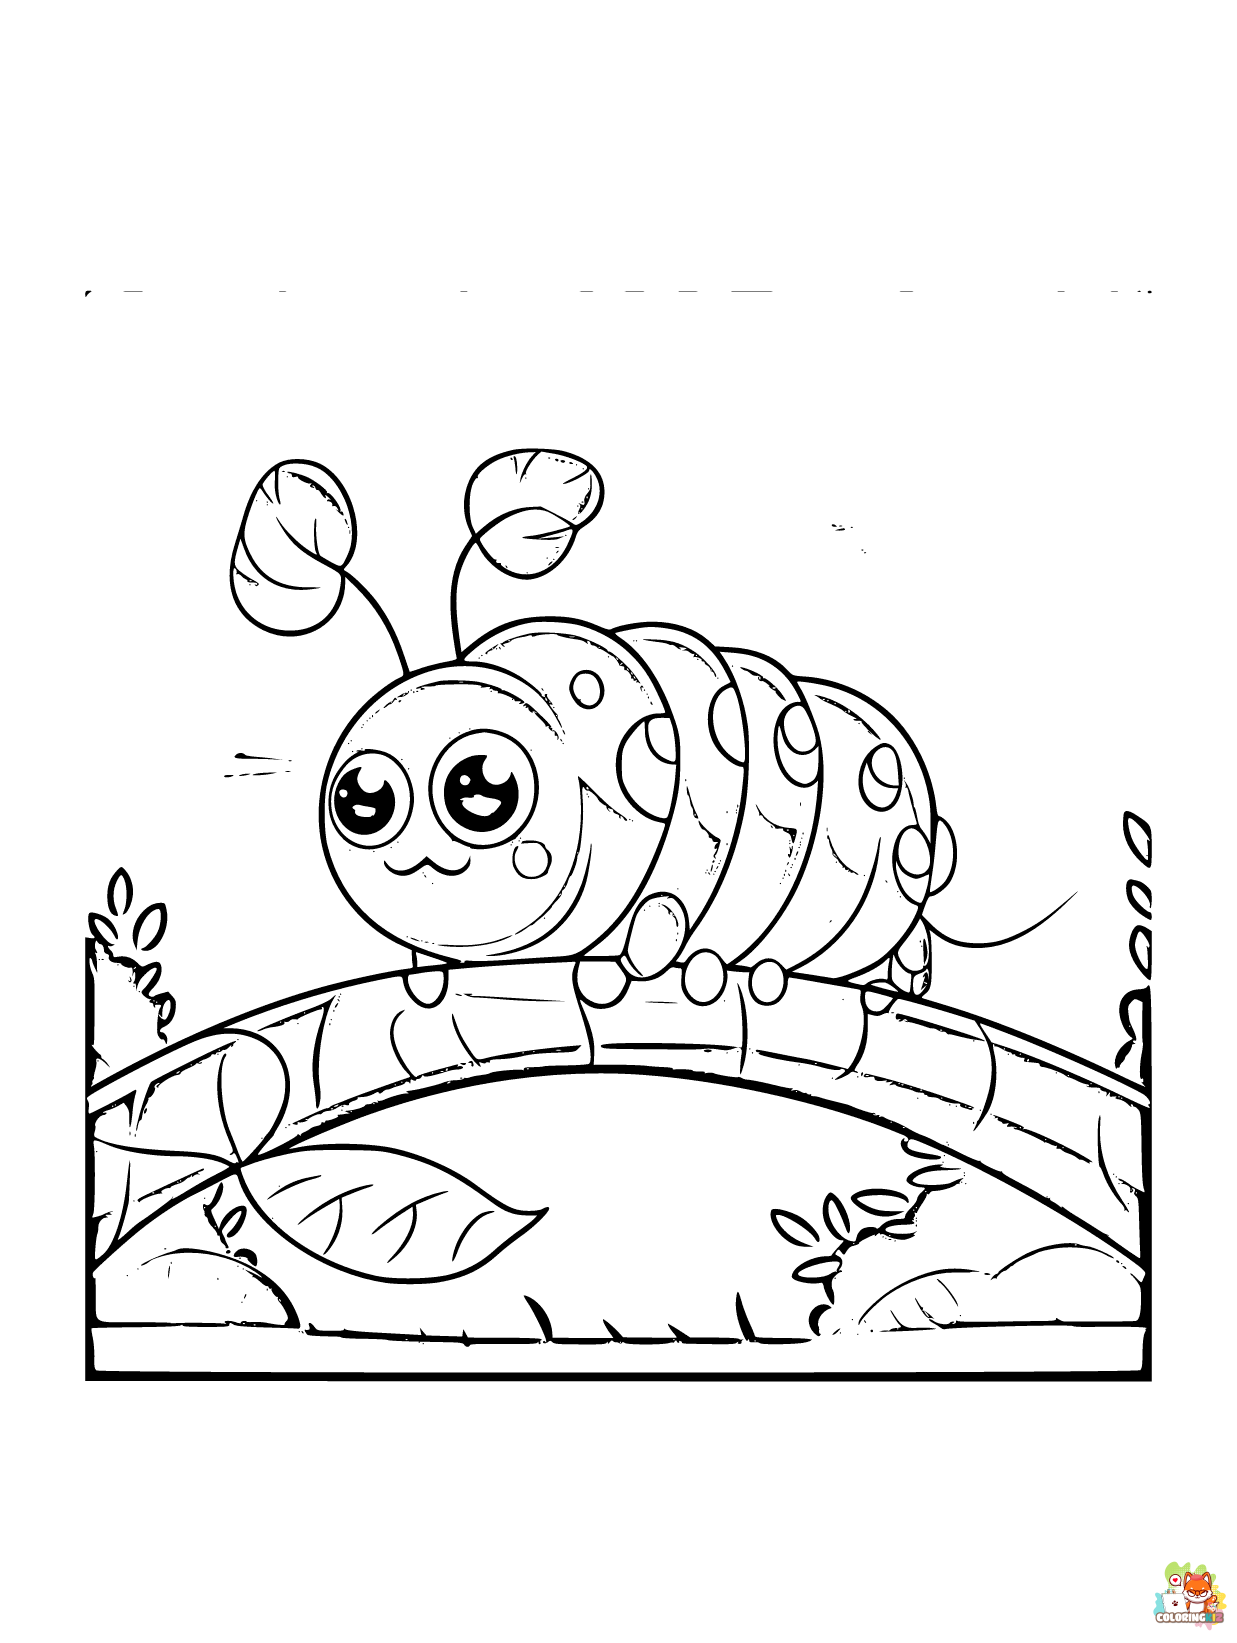 Caterpillar coloring pages free